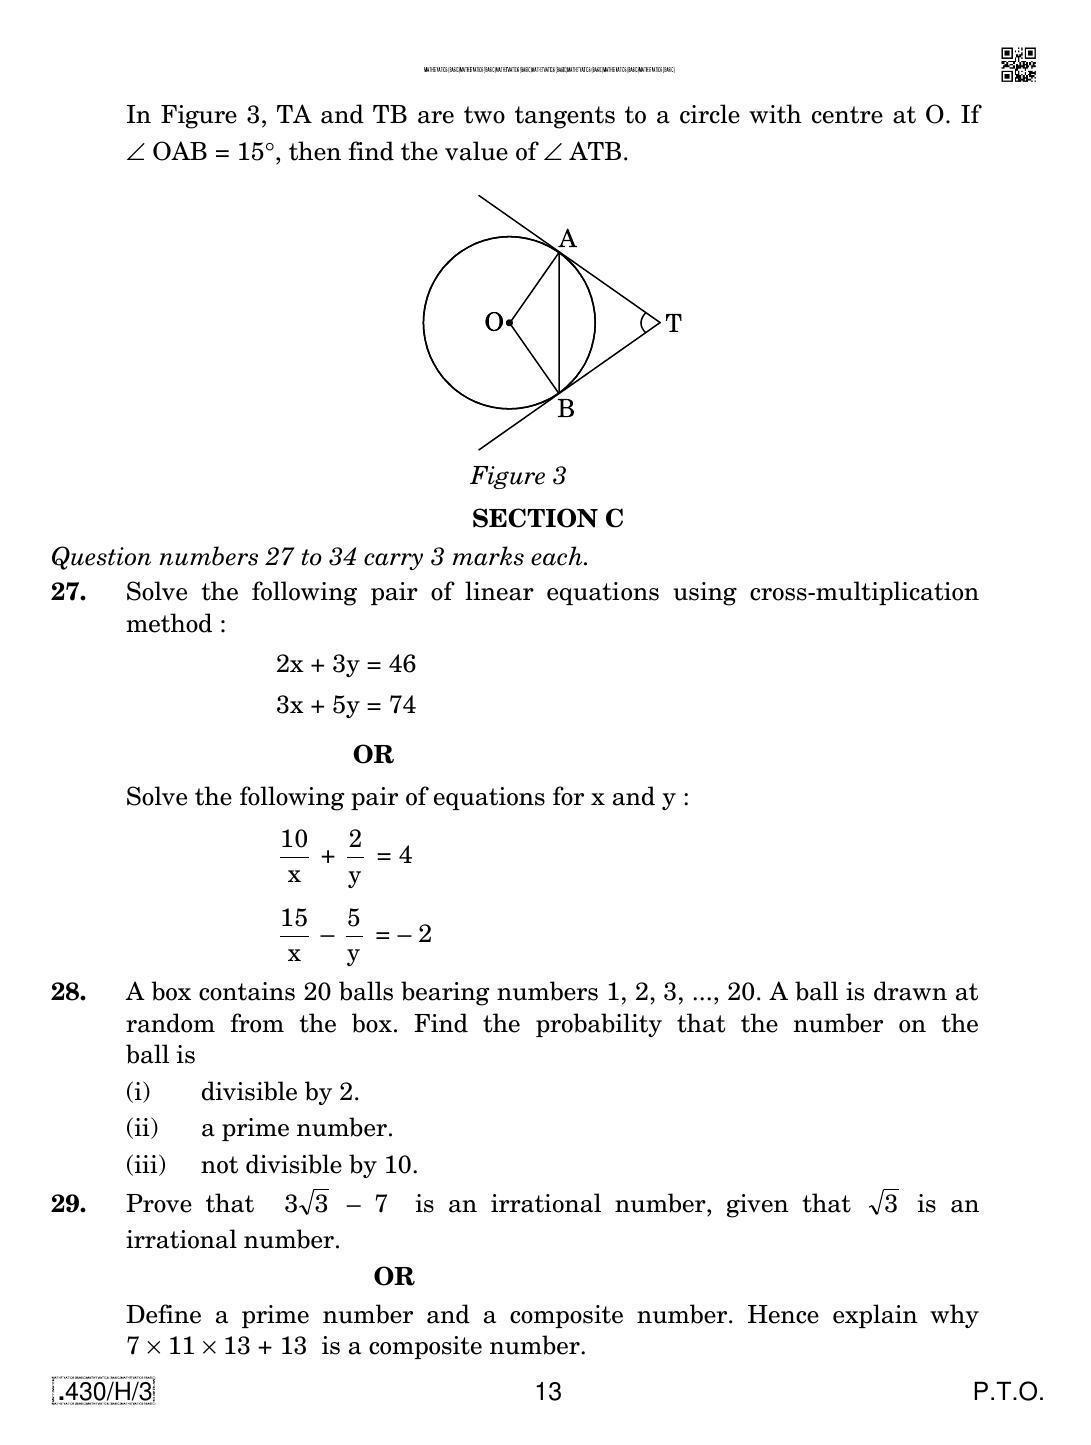 CBSE Class 10 430-C-3 - Maths (Basic) 2020 Compartment Question Paper - Page 13